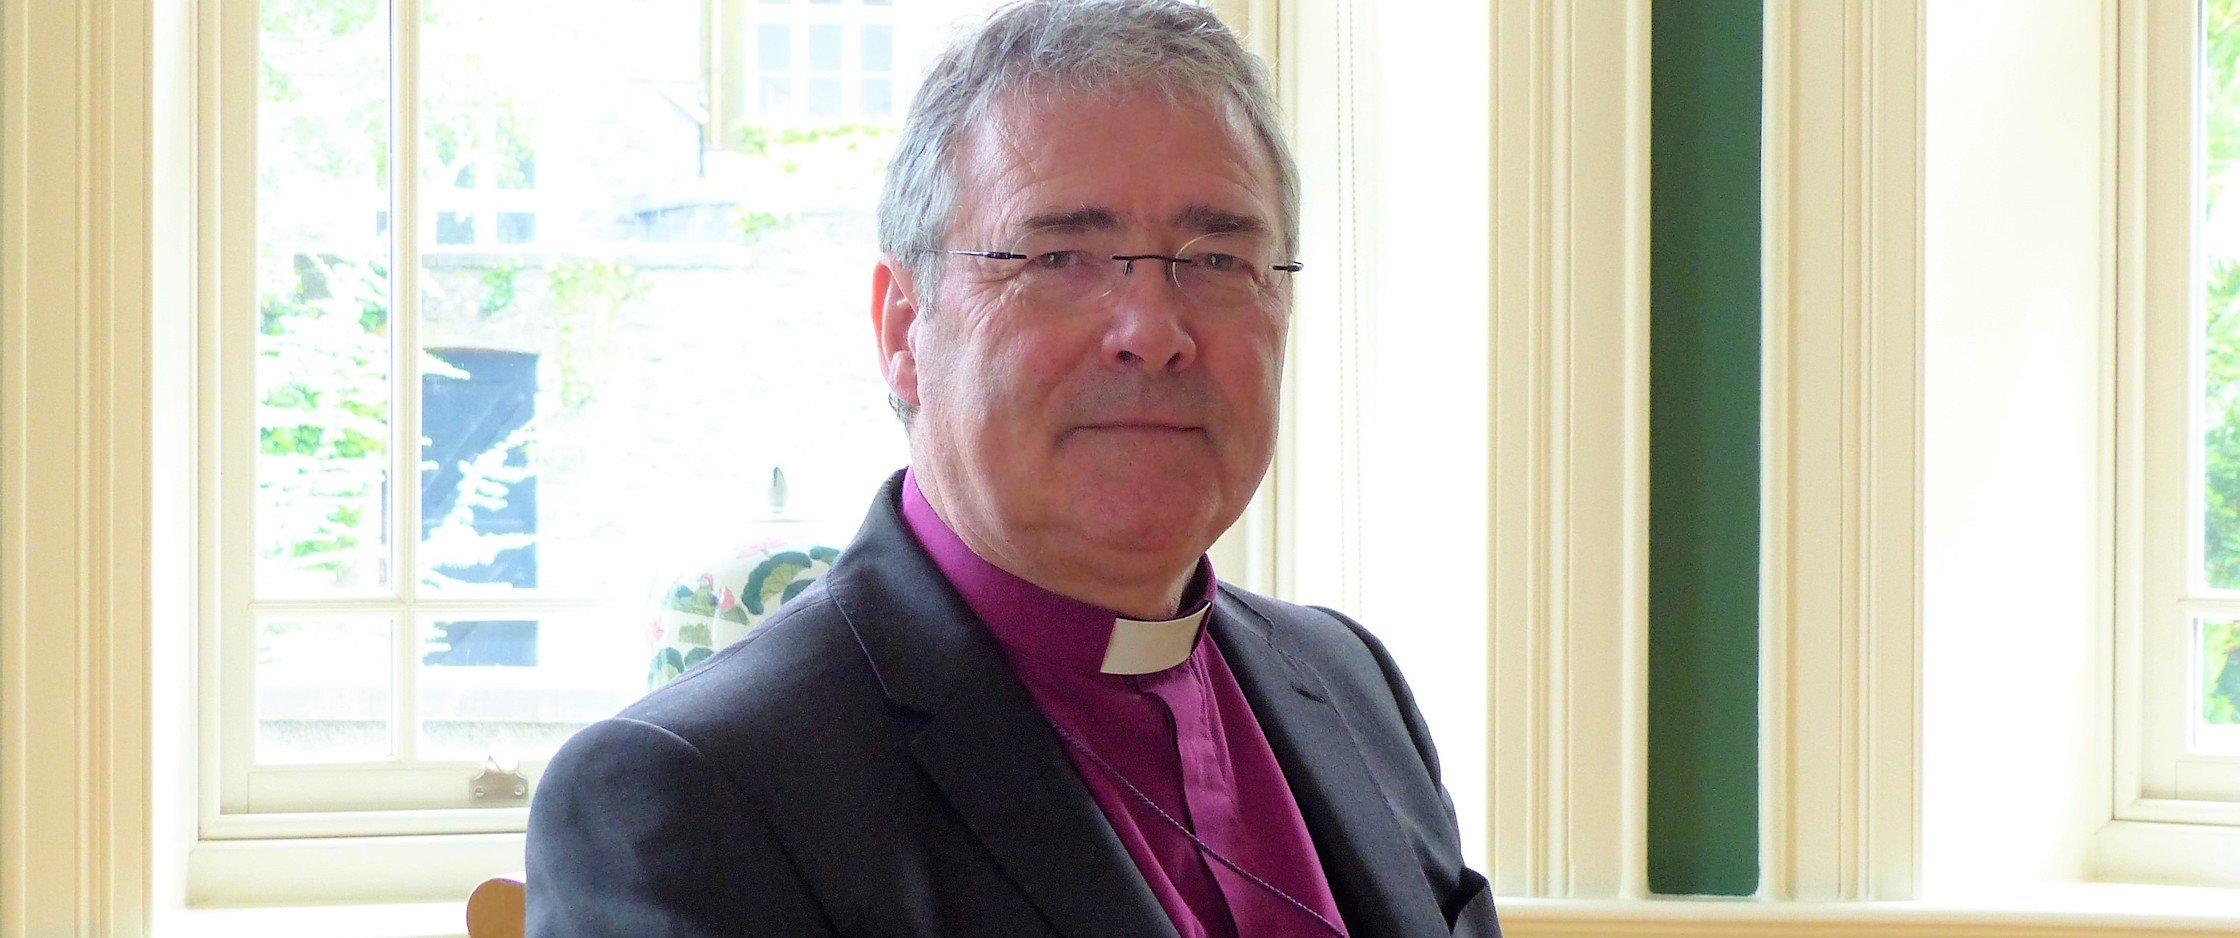 Archbishop of Armagh calls for balanced decisions